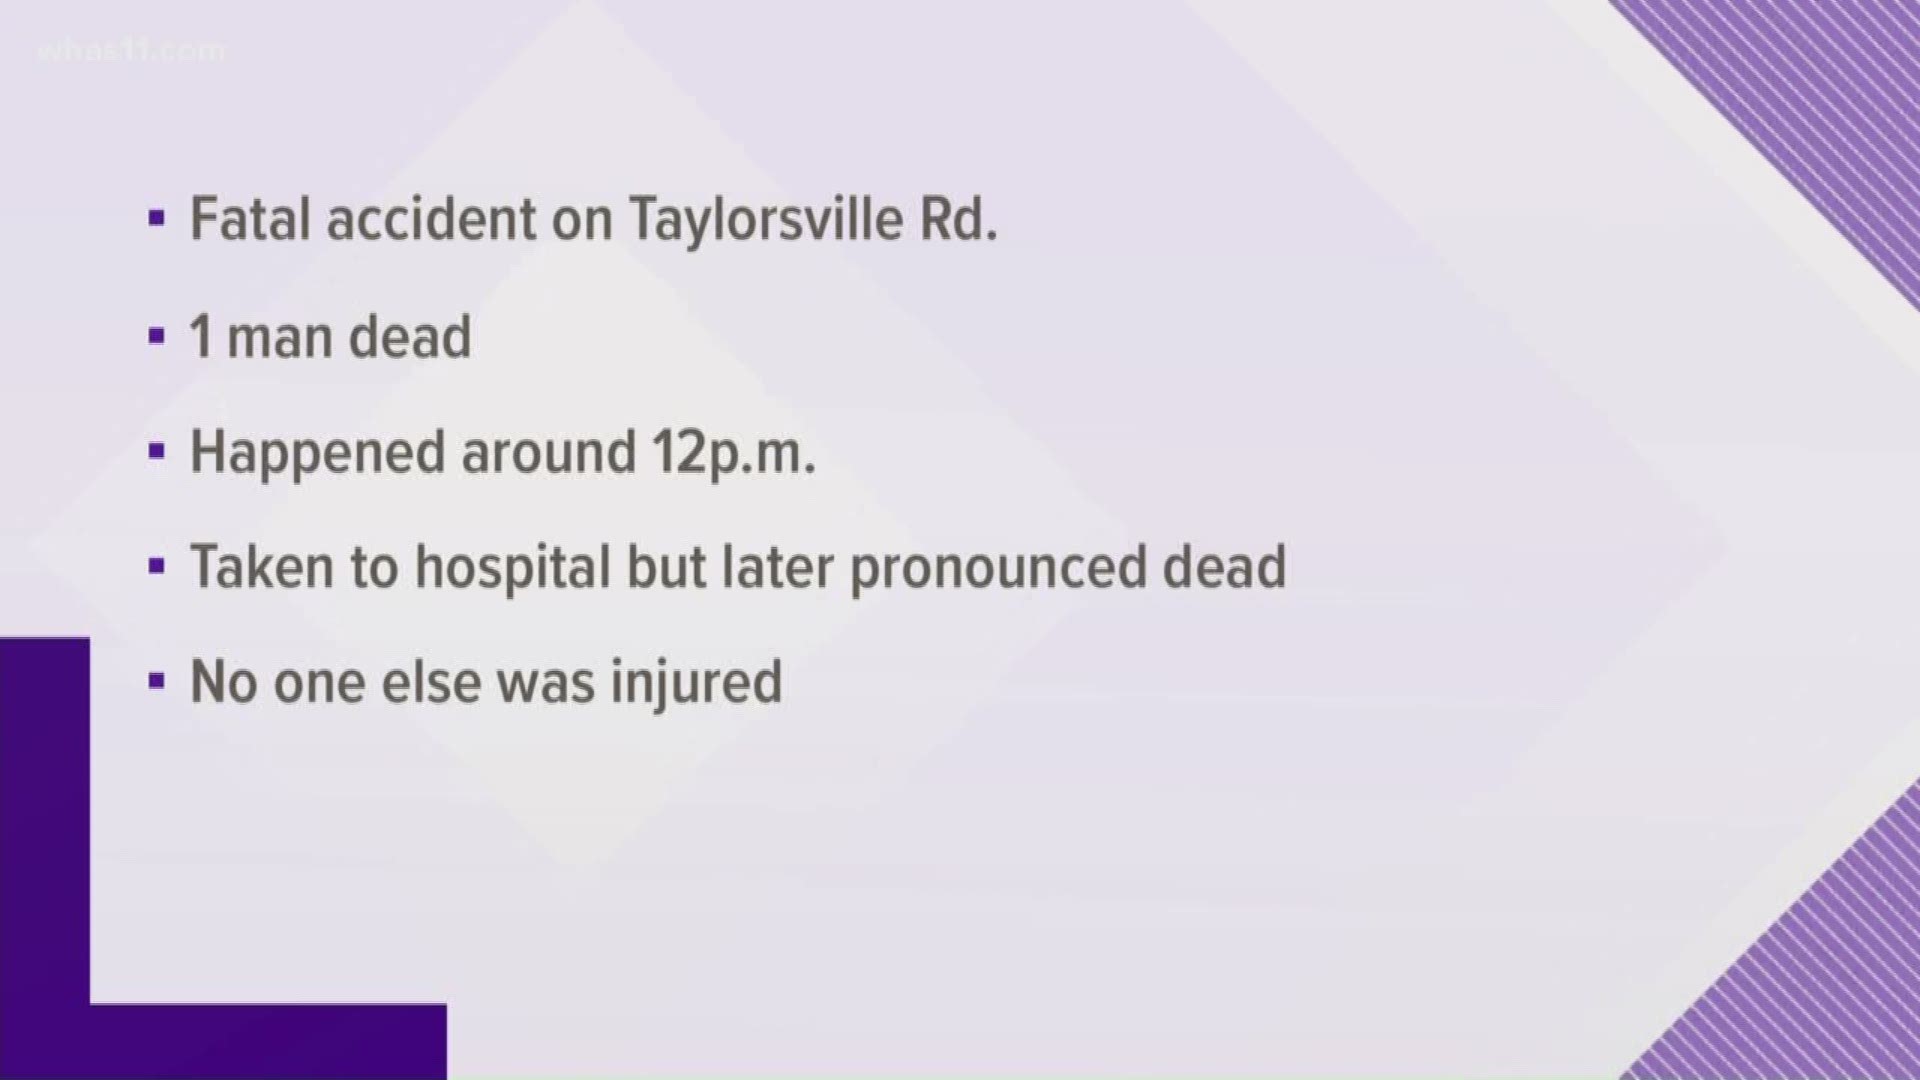 The driver of the pickup truck was transported to the University of Louisville Hospital where he was pronounced dead.